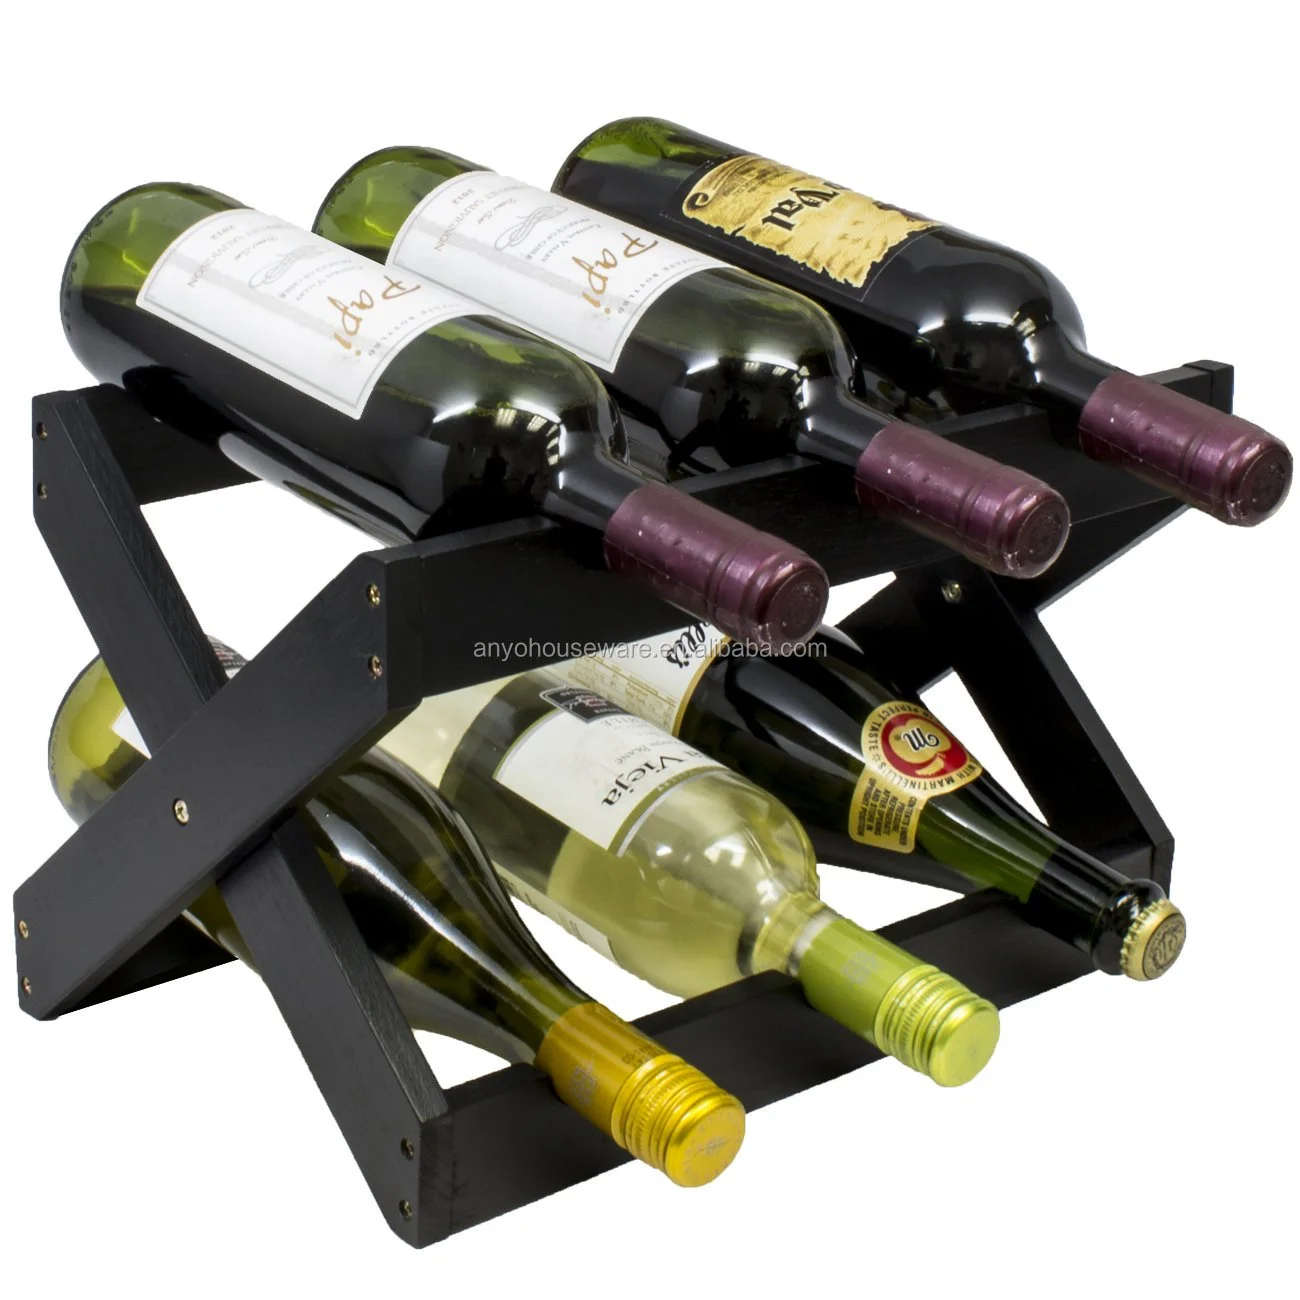 Factory Foldable Bamboo Wine Rack 6-bottles Table Stand for Home